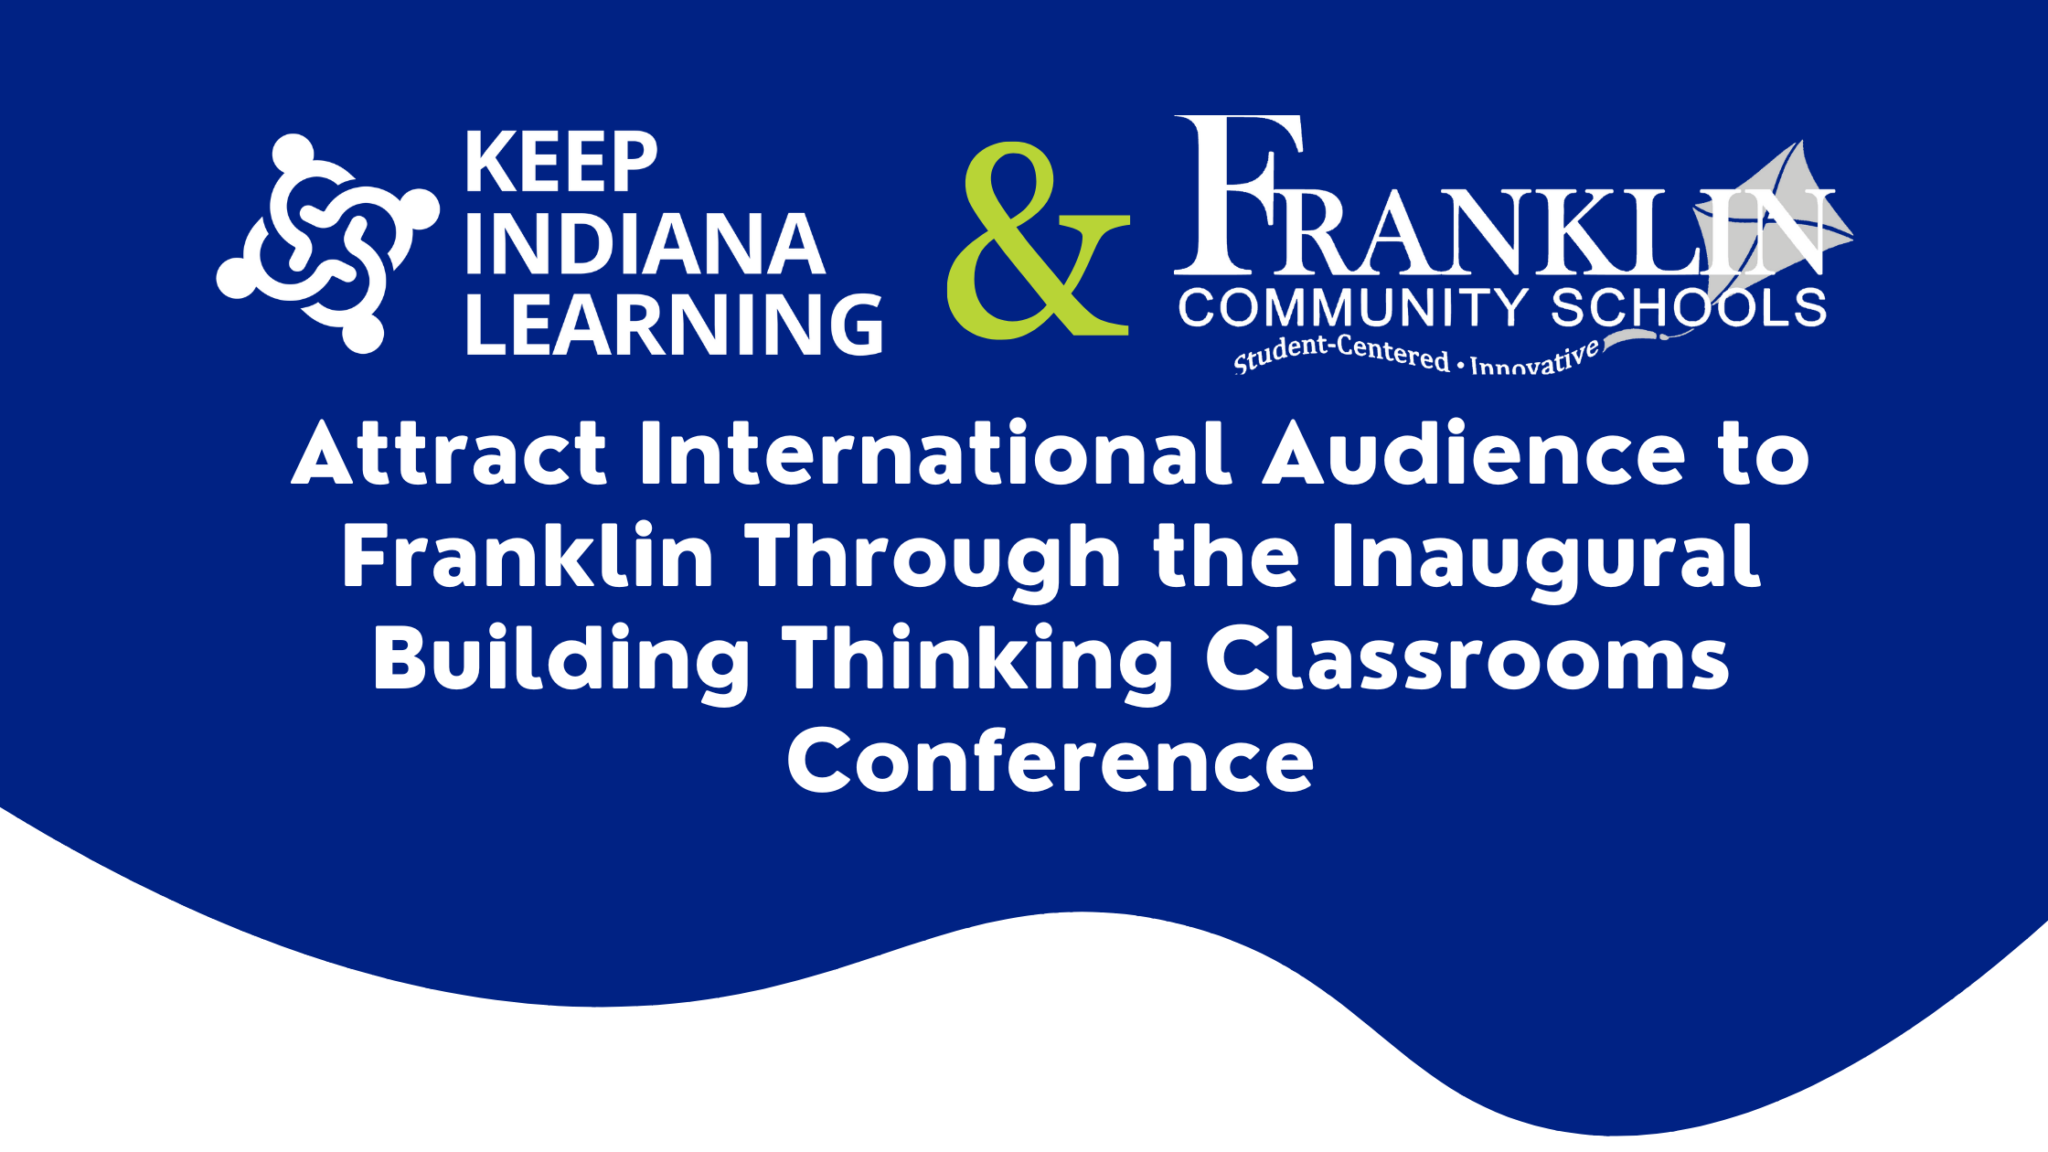 Franklin Community Schools and Keep Indiana Learning Attract